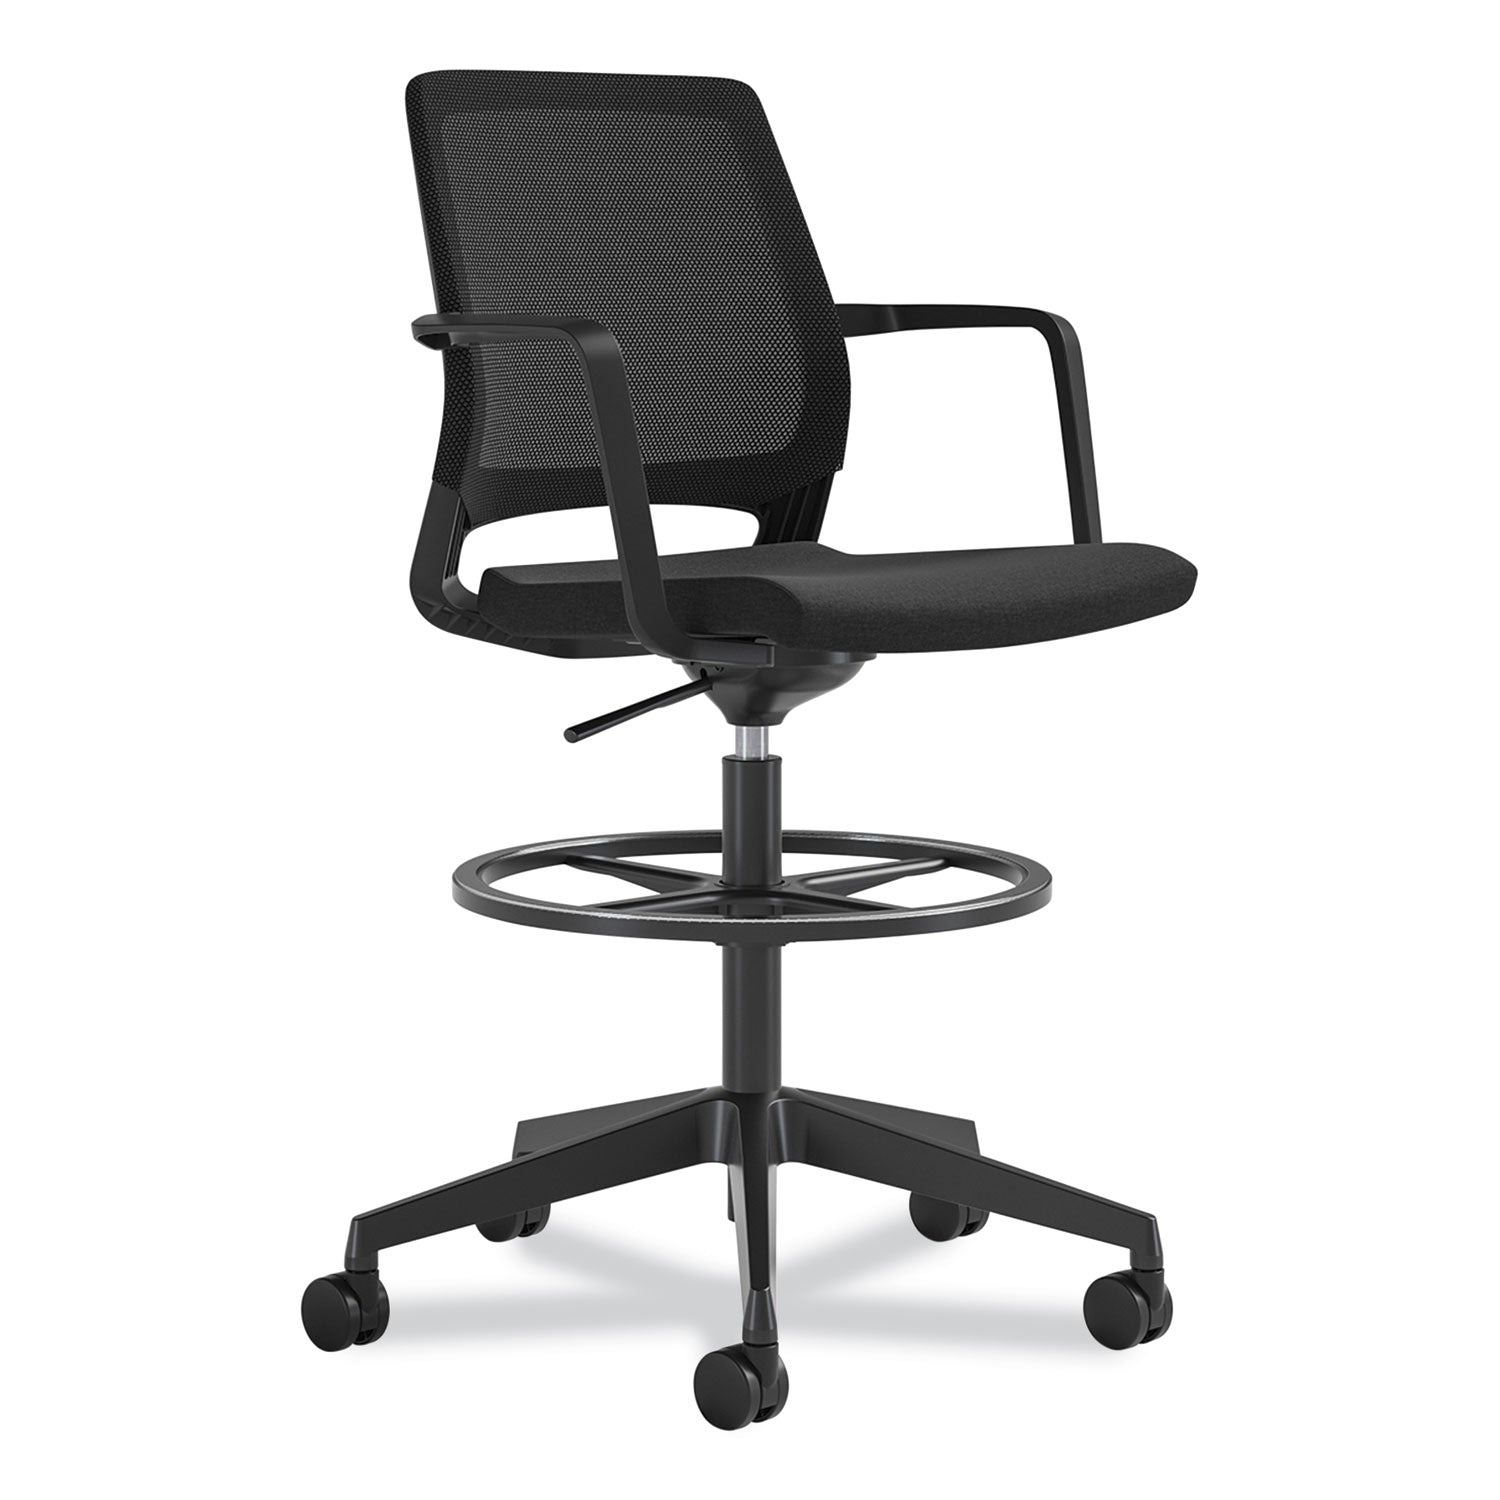 medina-extended-height-chair-supports-up-to-275-lb-23-to-33-high-black-seat-black-back-baseships-in-1-3-business-days_saf6827bl - 1